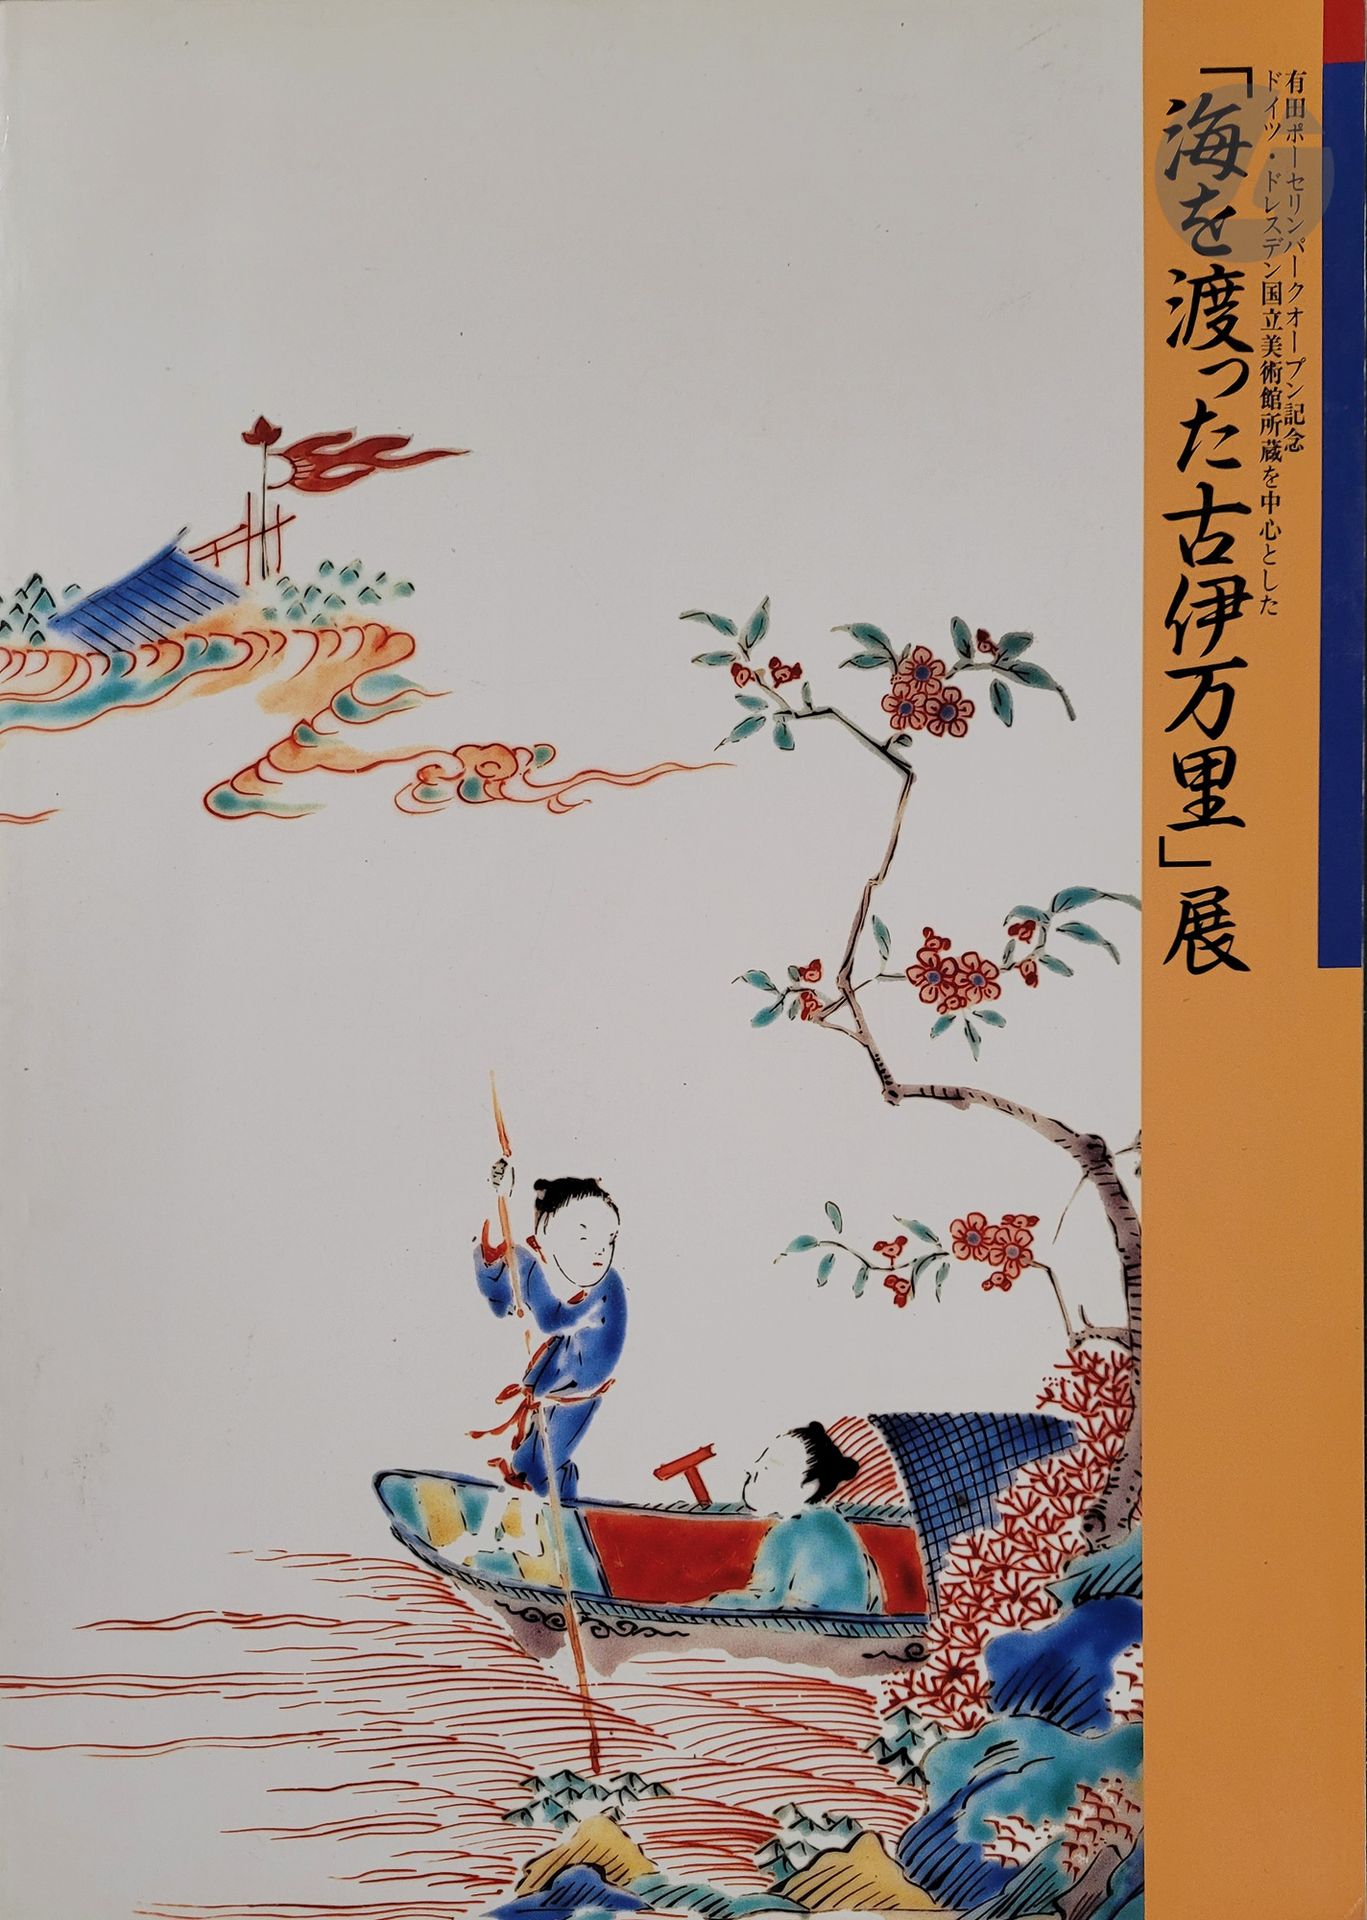 Null JAPAN - PORCELAIN] 
Eight books:
- Three catalogues of Japanese art collect&hellip;